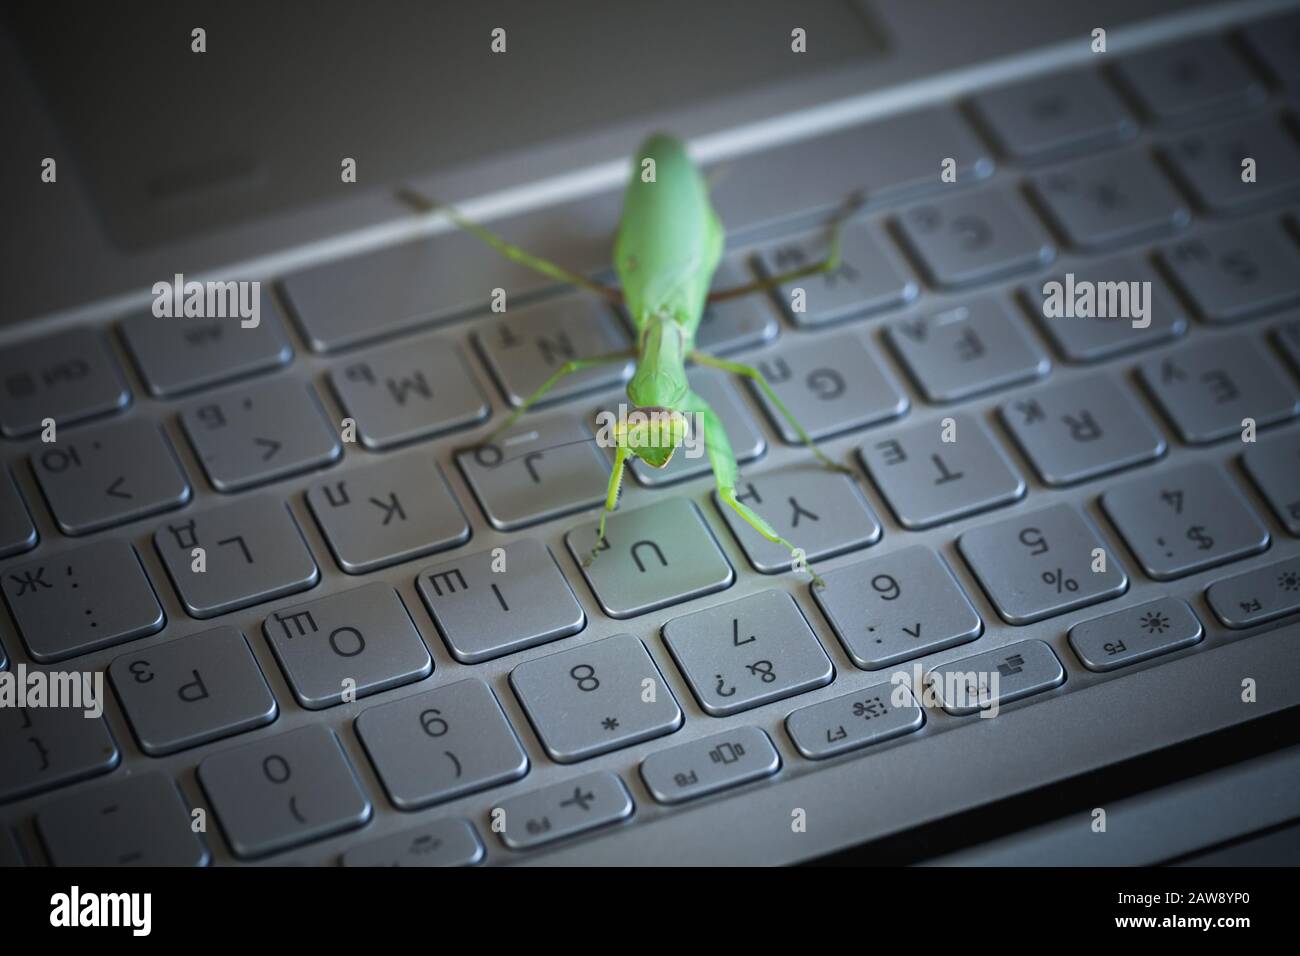 Computer bug or virus metaphor, green mantis is on shiny metallic keyboard with English and Russian letters Stock Photo